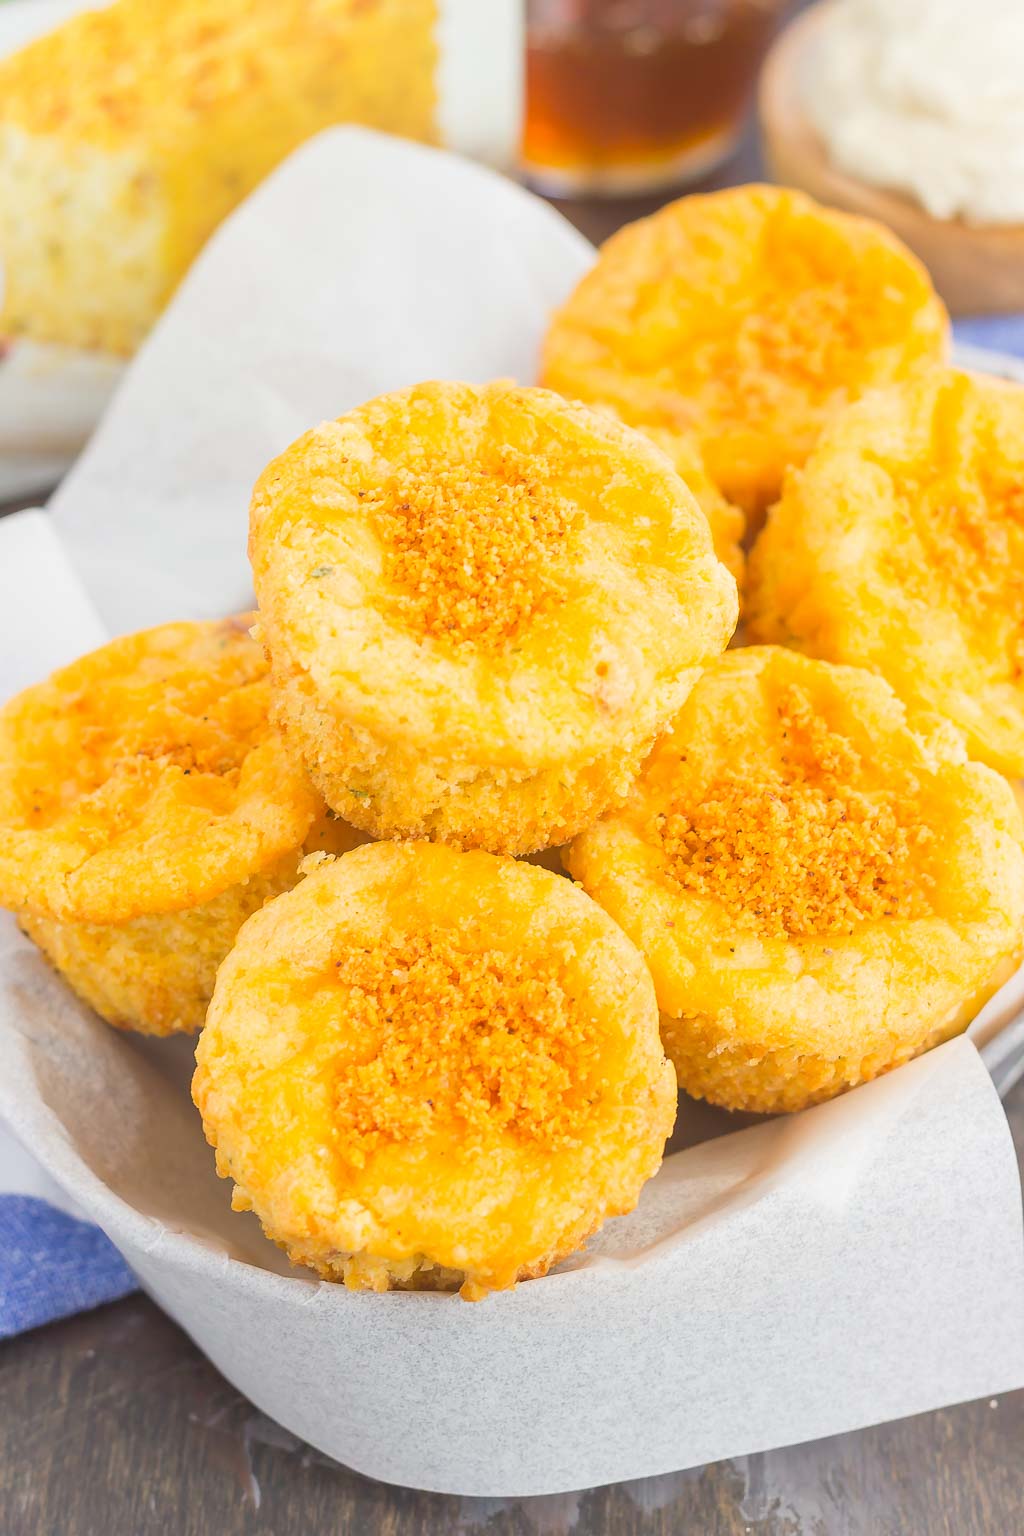 These Cheesy Cornbread Muffins are loaded with flavor and easy to make. Filled with cheddar cheese, zesty spices and baked until golden, these muffins are perfect to serve as a simple side dish or snack!